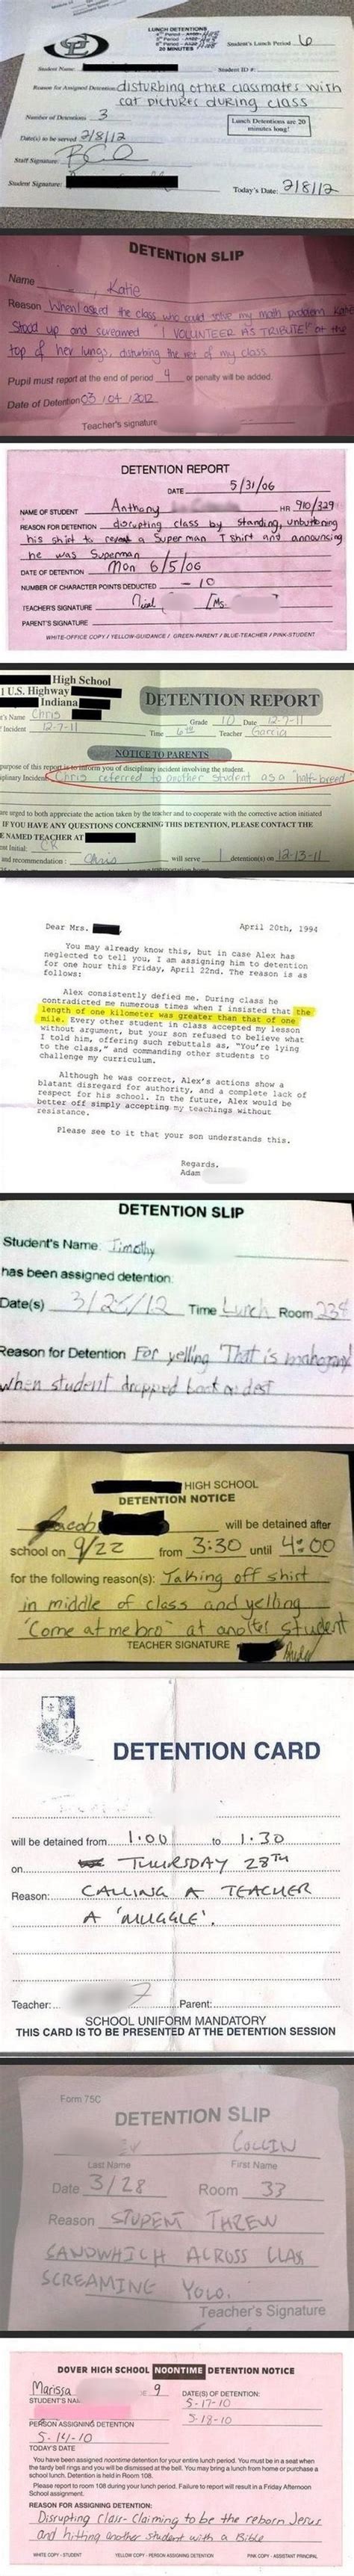 pin by nikki freer on endless entertainment funny detention slips make me laugh funny